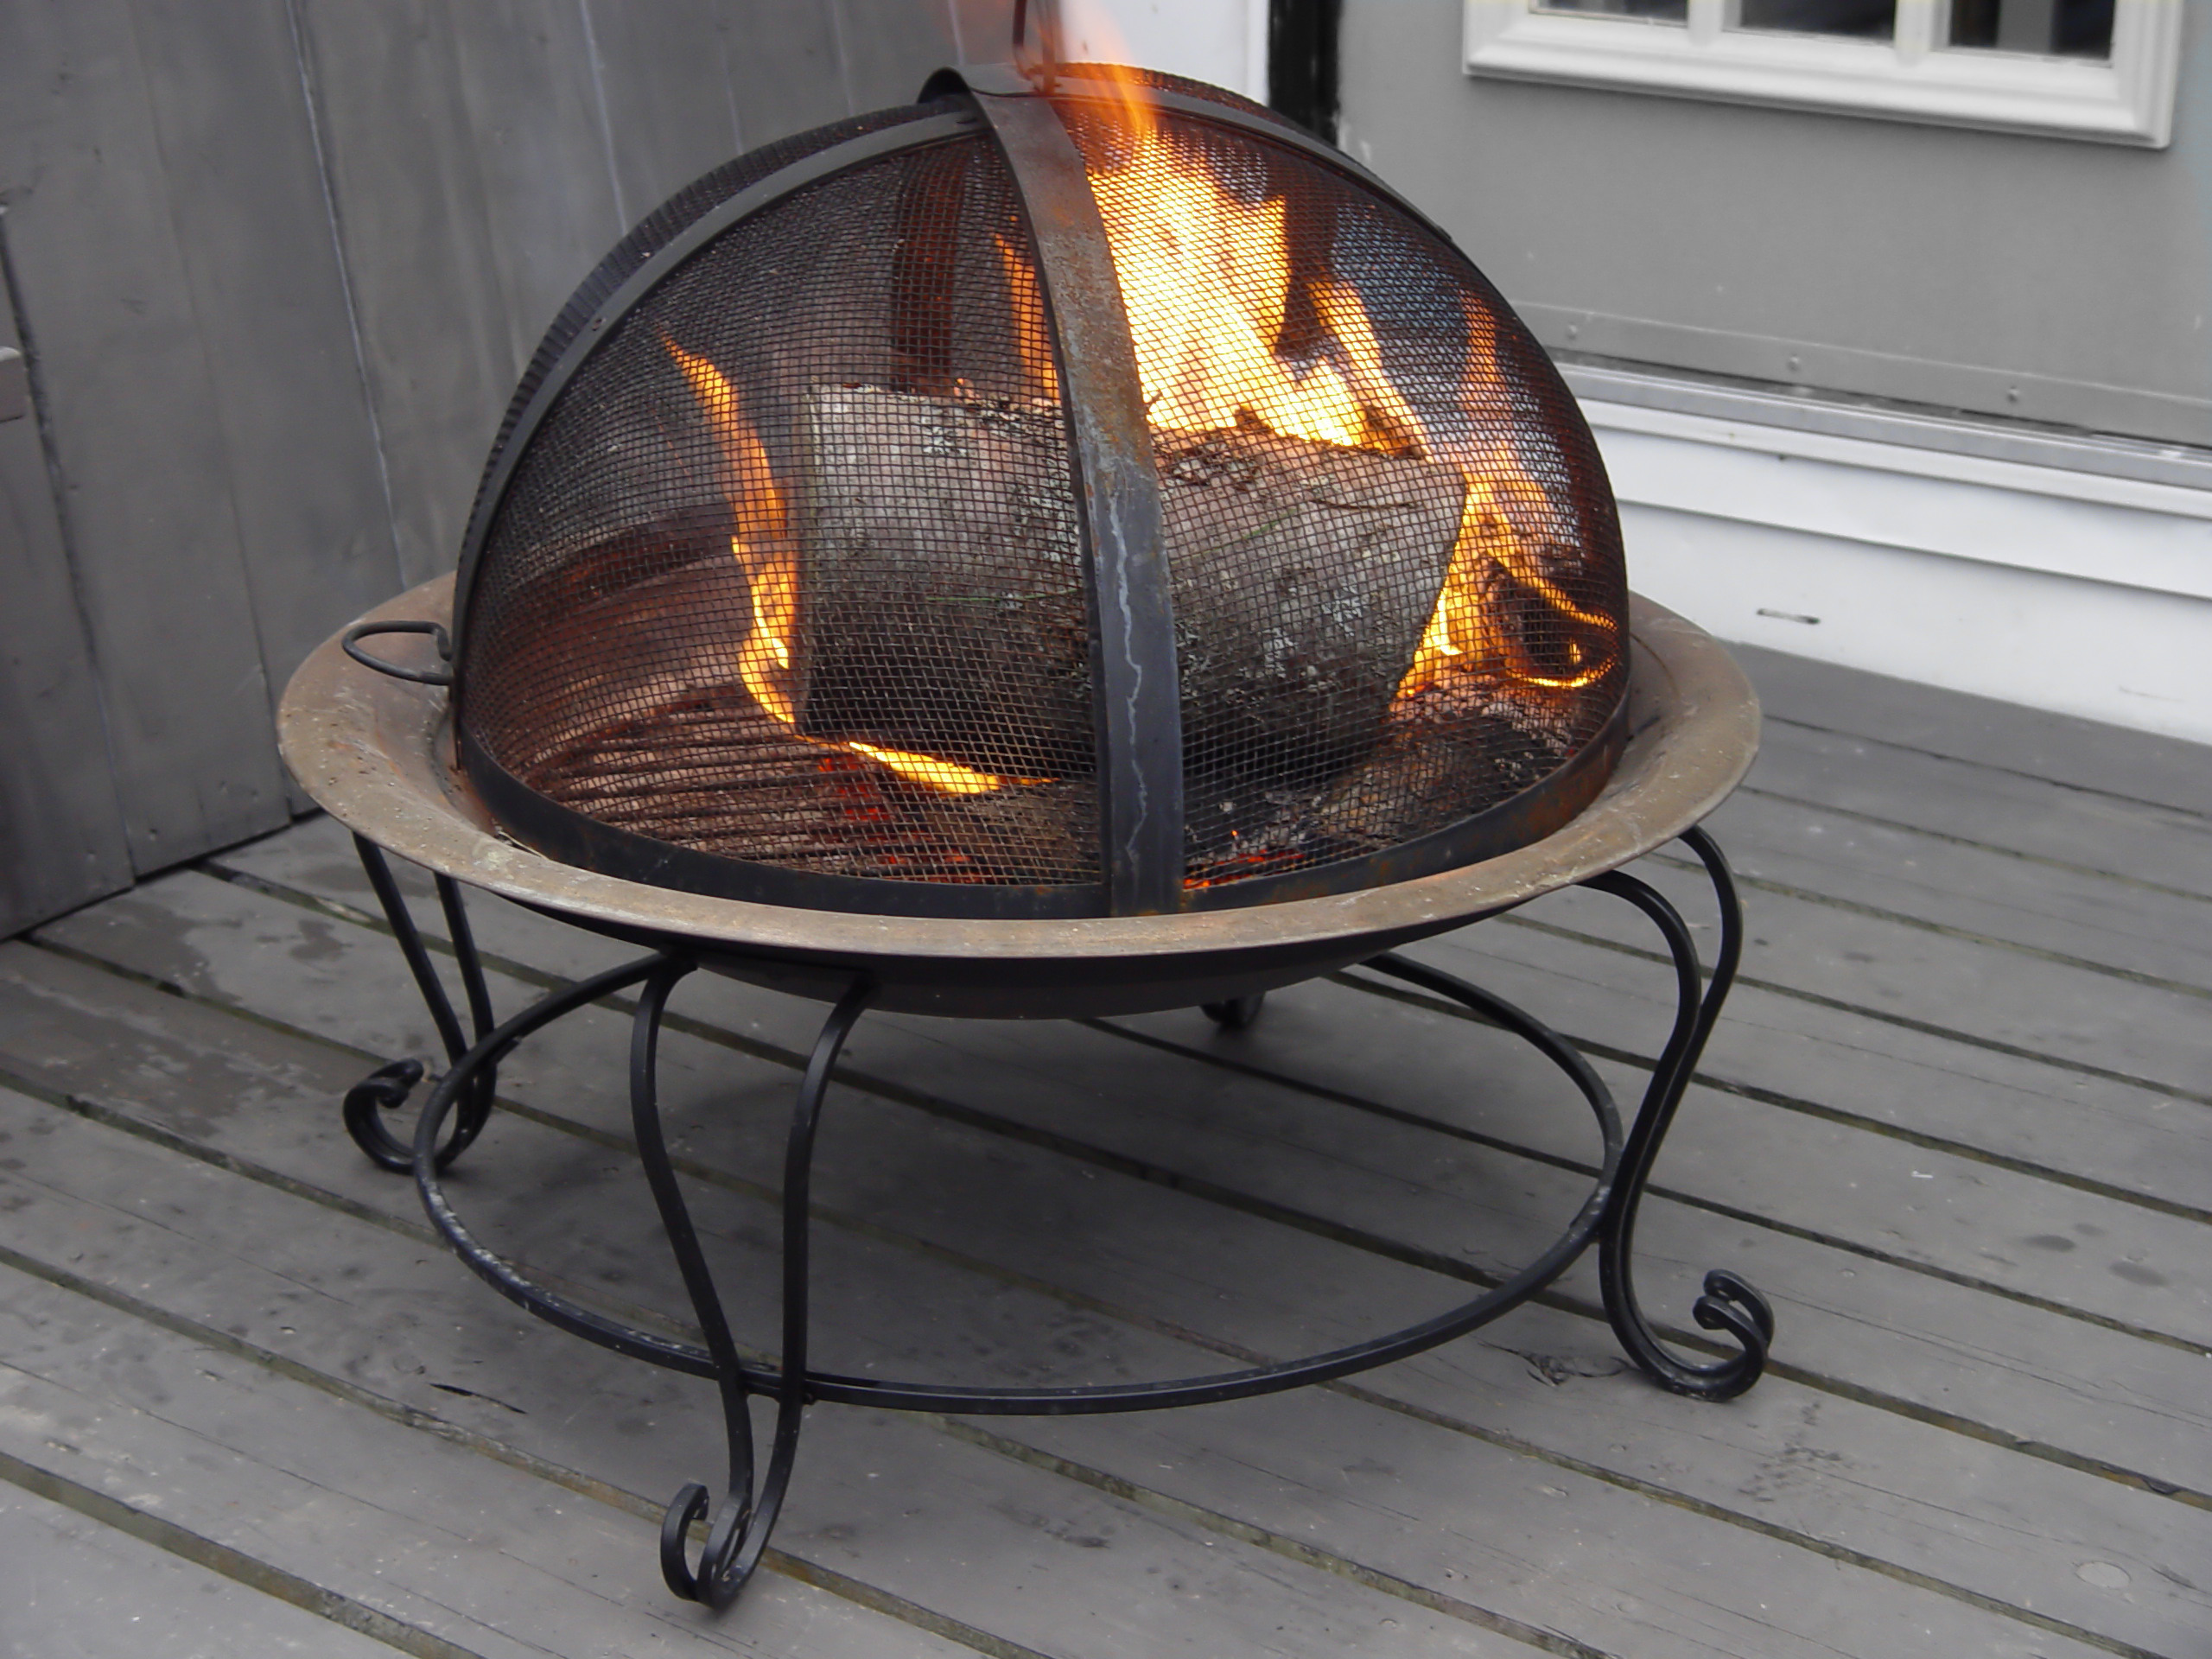 How Do You Fireproof A Timber Deck, Fire Pit Suitable For Composite Decking Uk